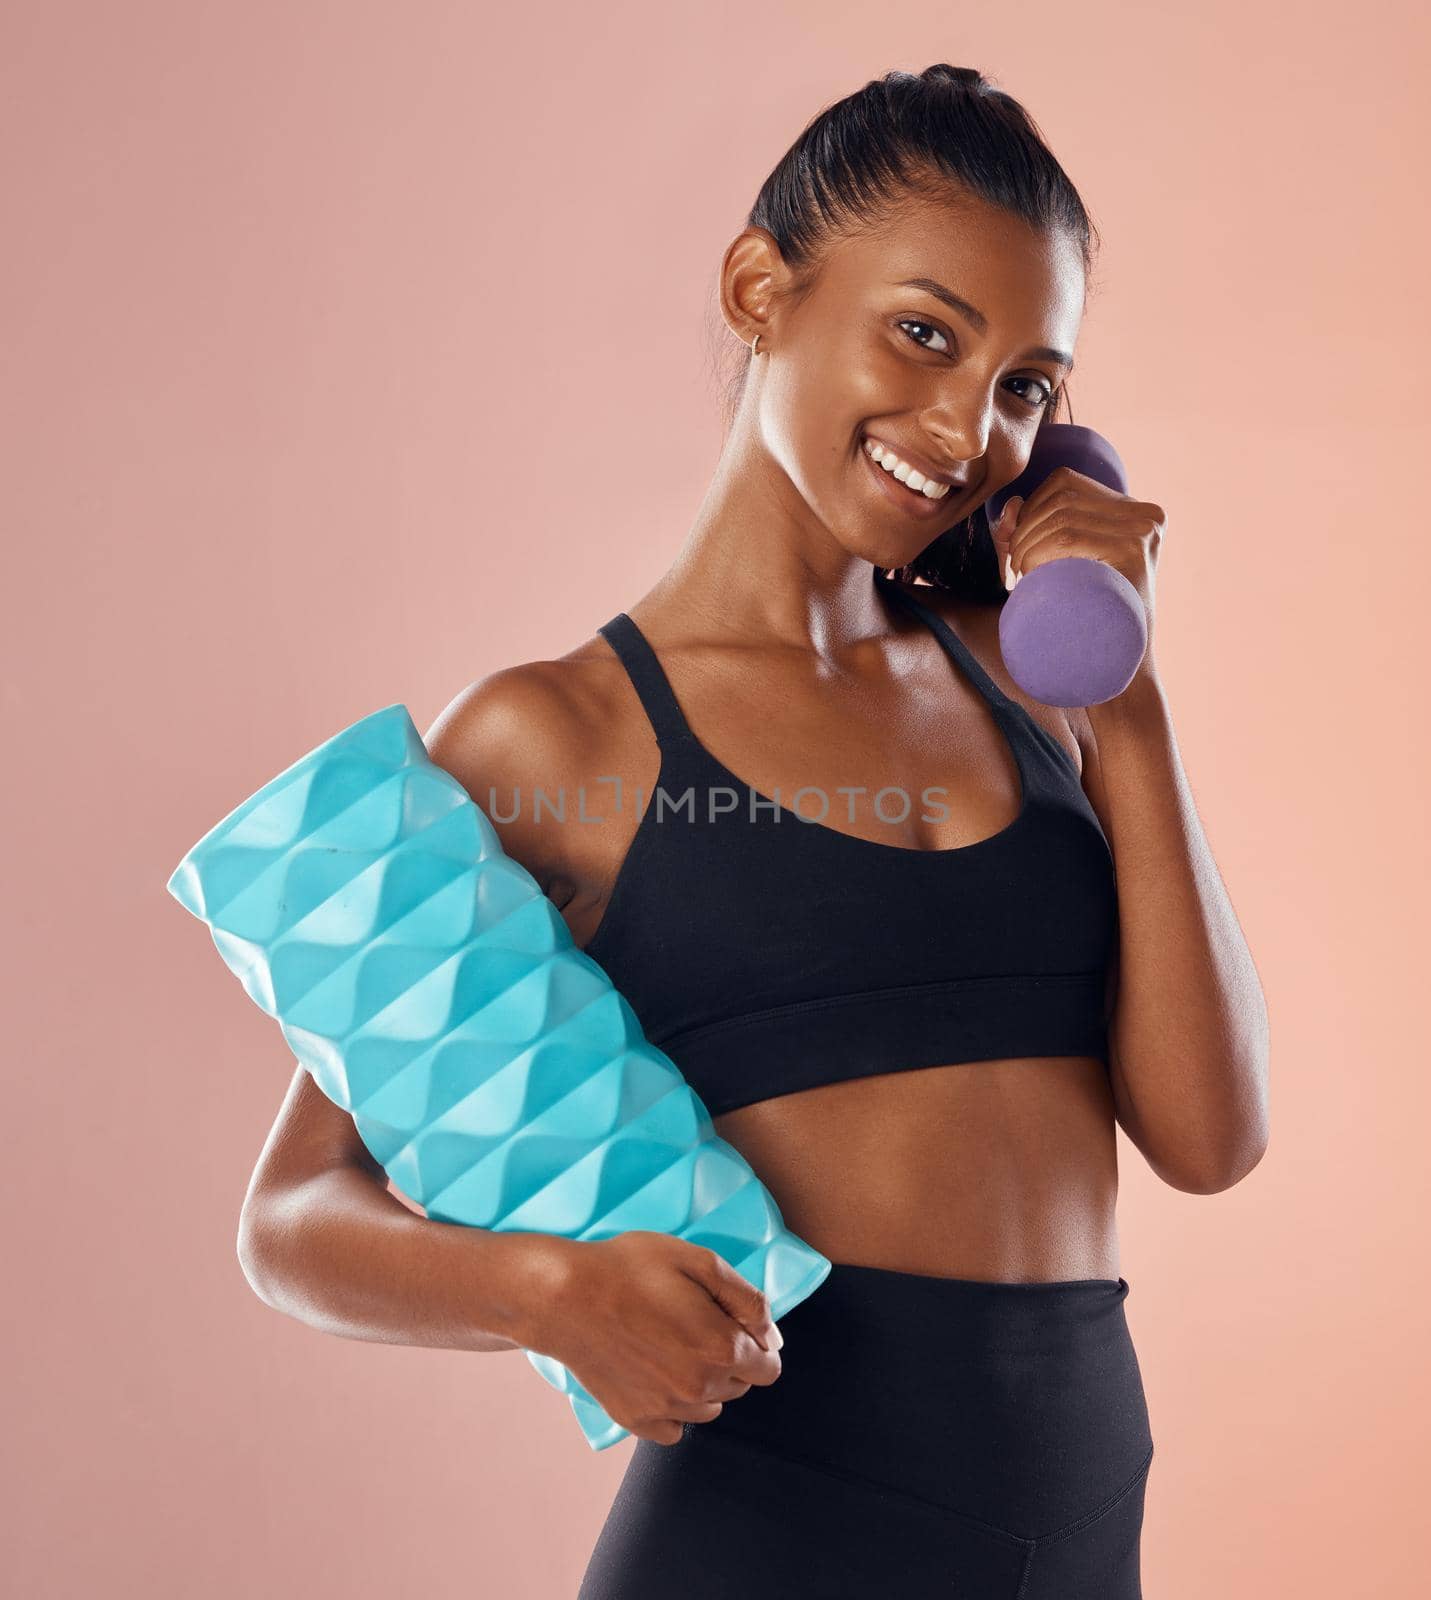 Smiling, healthy and slim female fitness instructor, holding weights and exercise equipment or tools for workout. Beautiful woman athlete with a fit body in gym sportswear against studio background by YuriArcurs